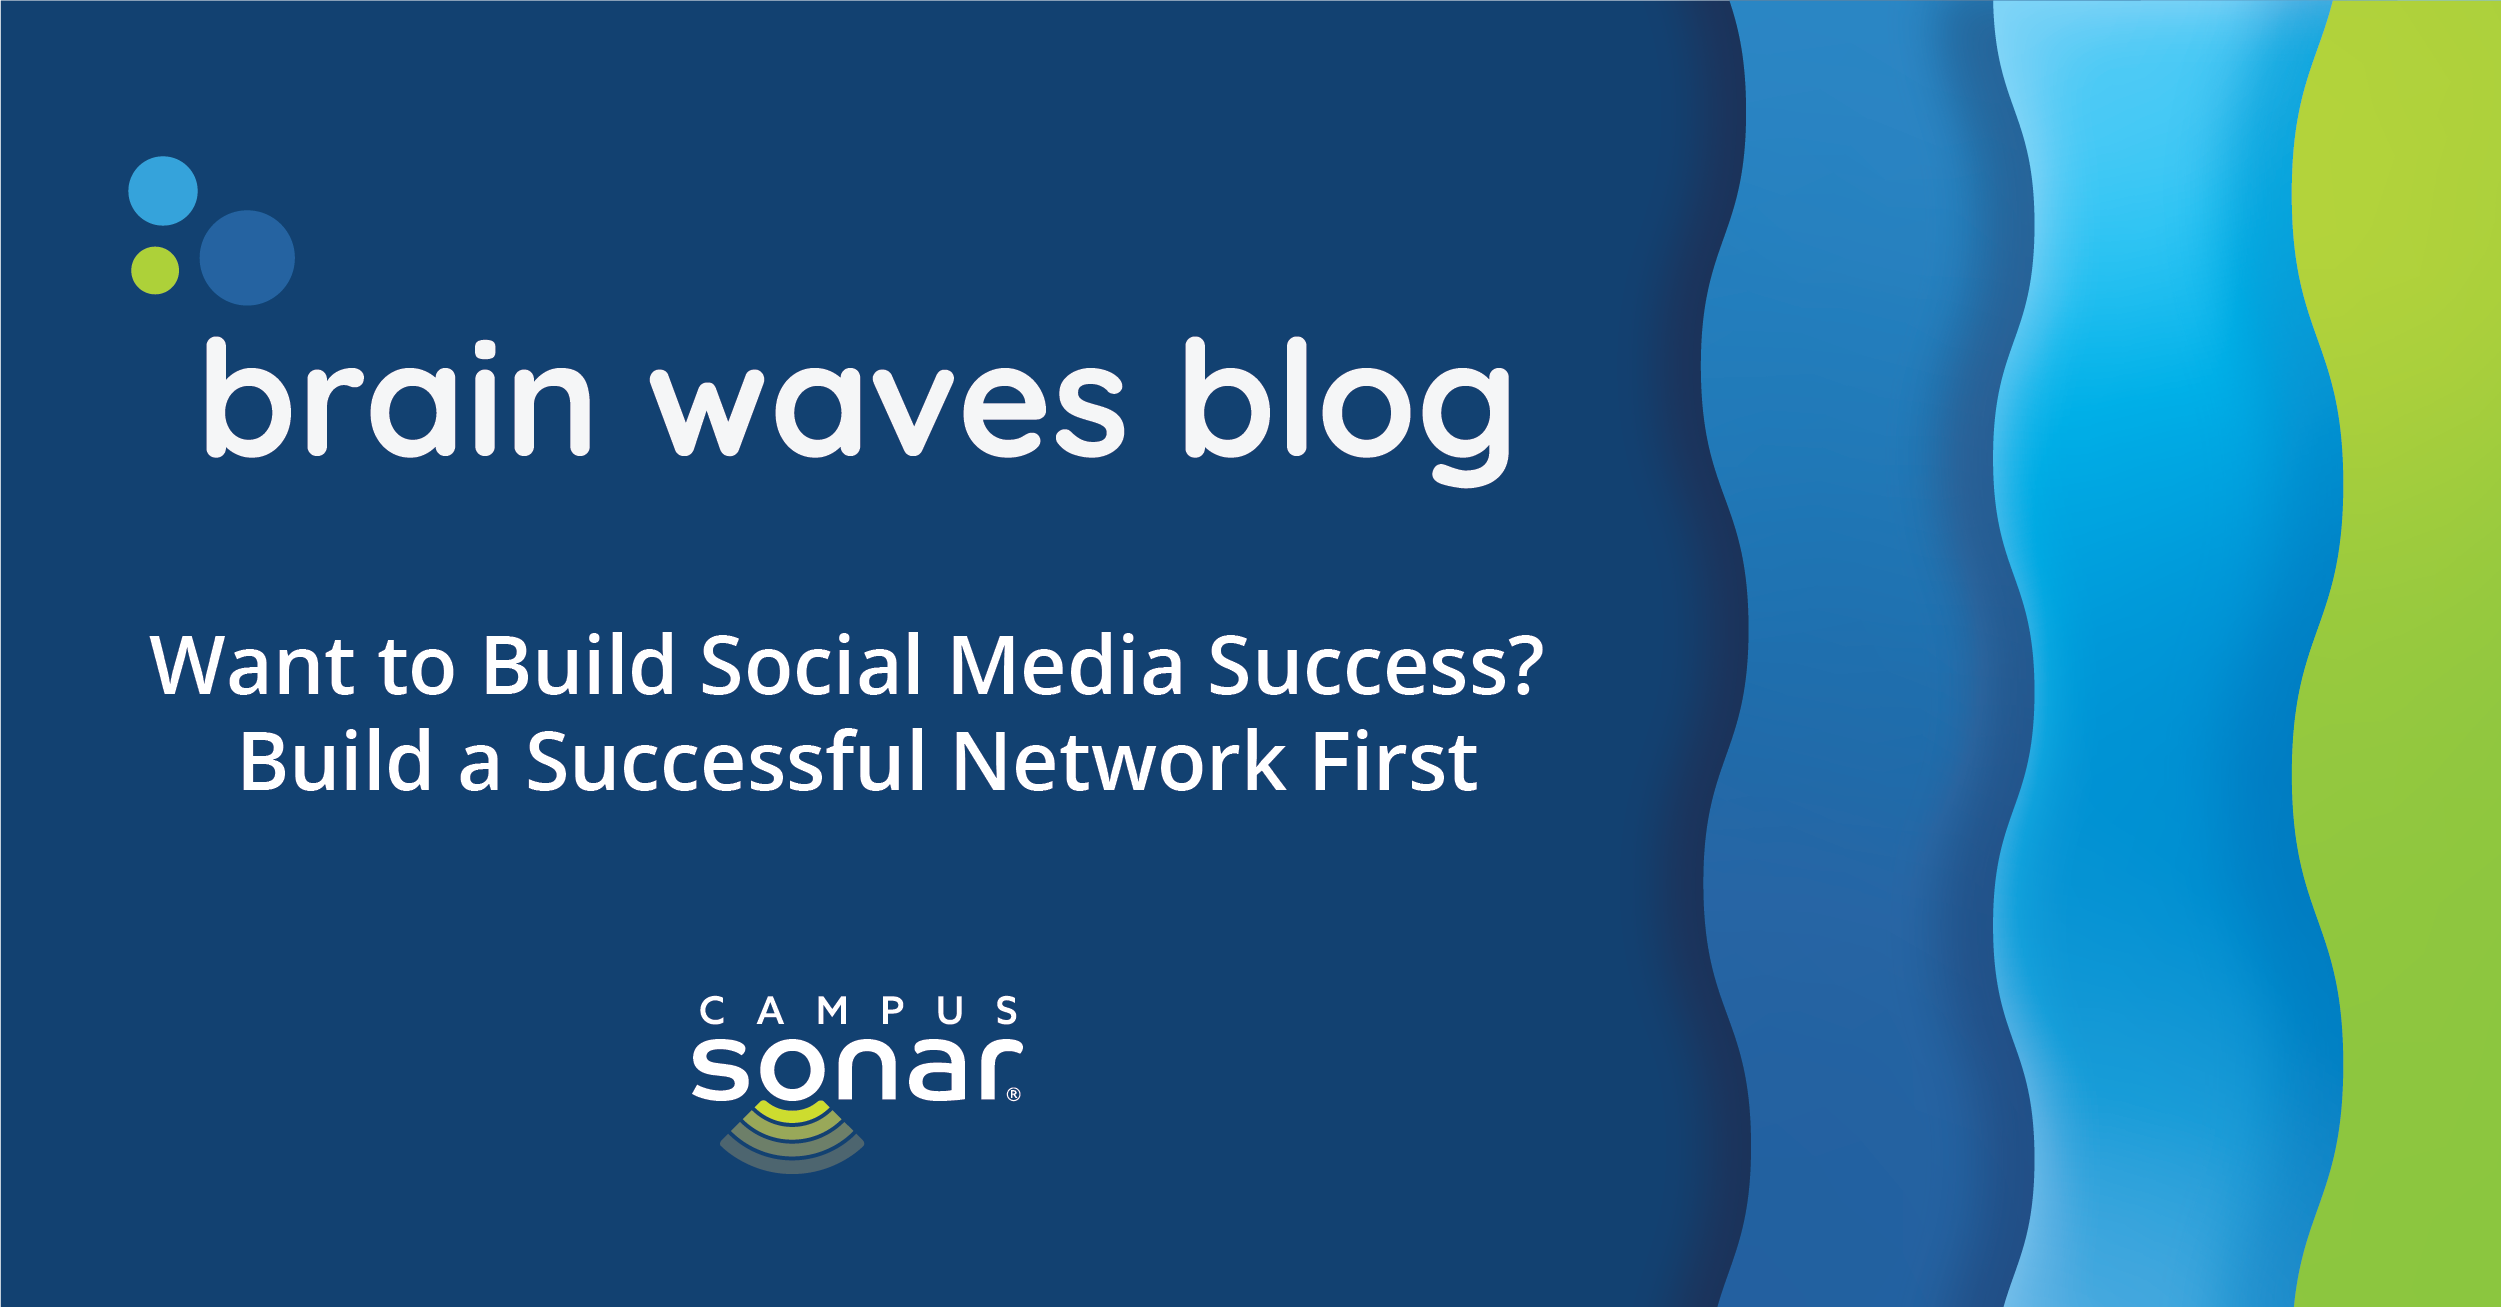 Want to Build Social Media Success? Build a Successful Network First